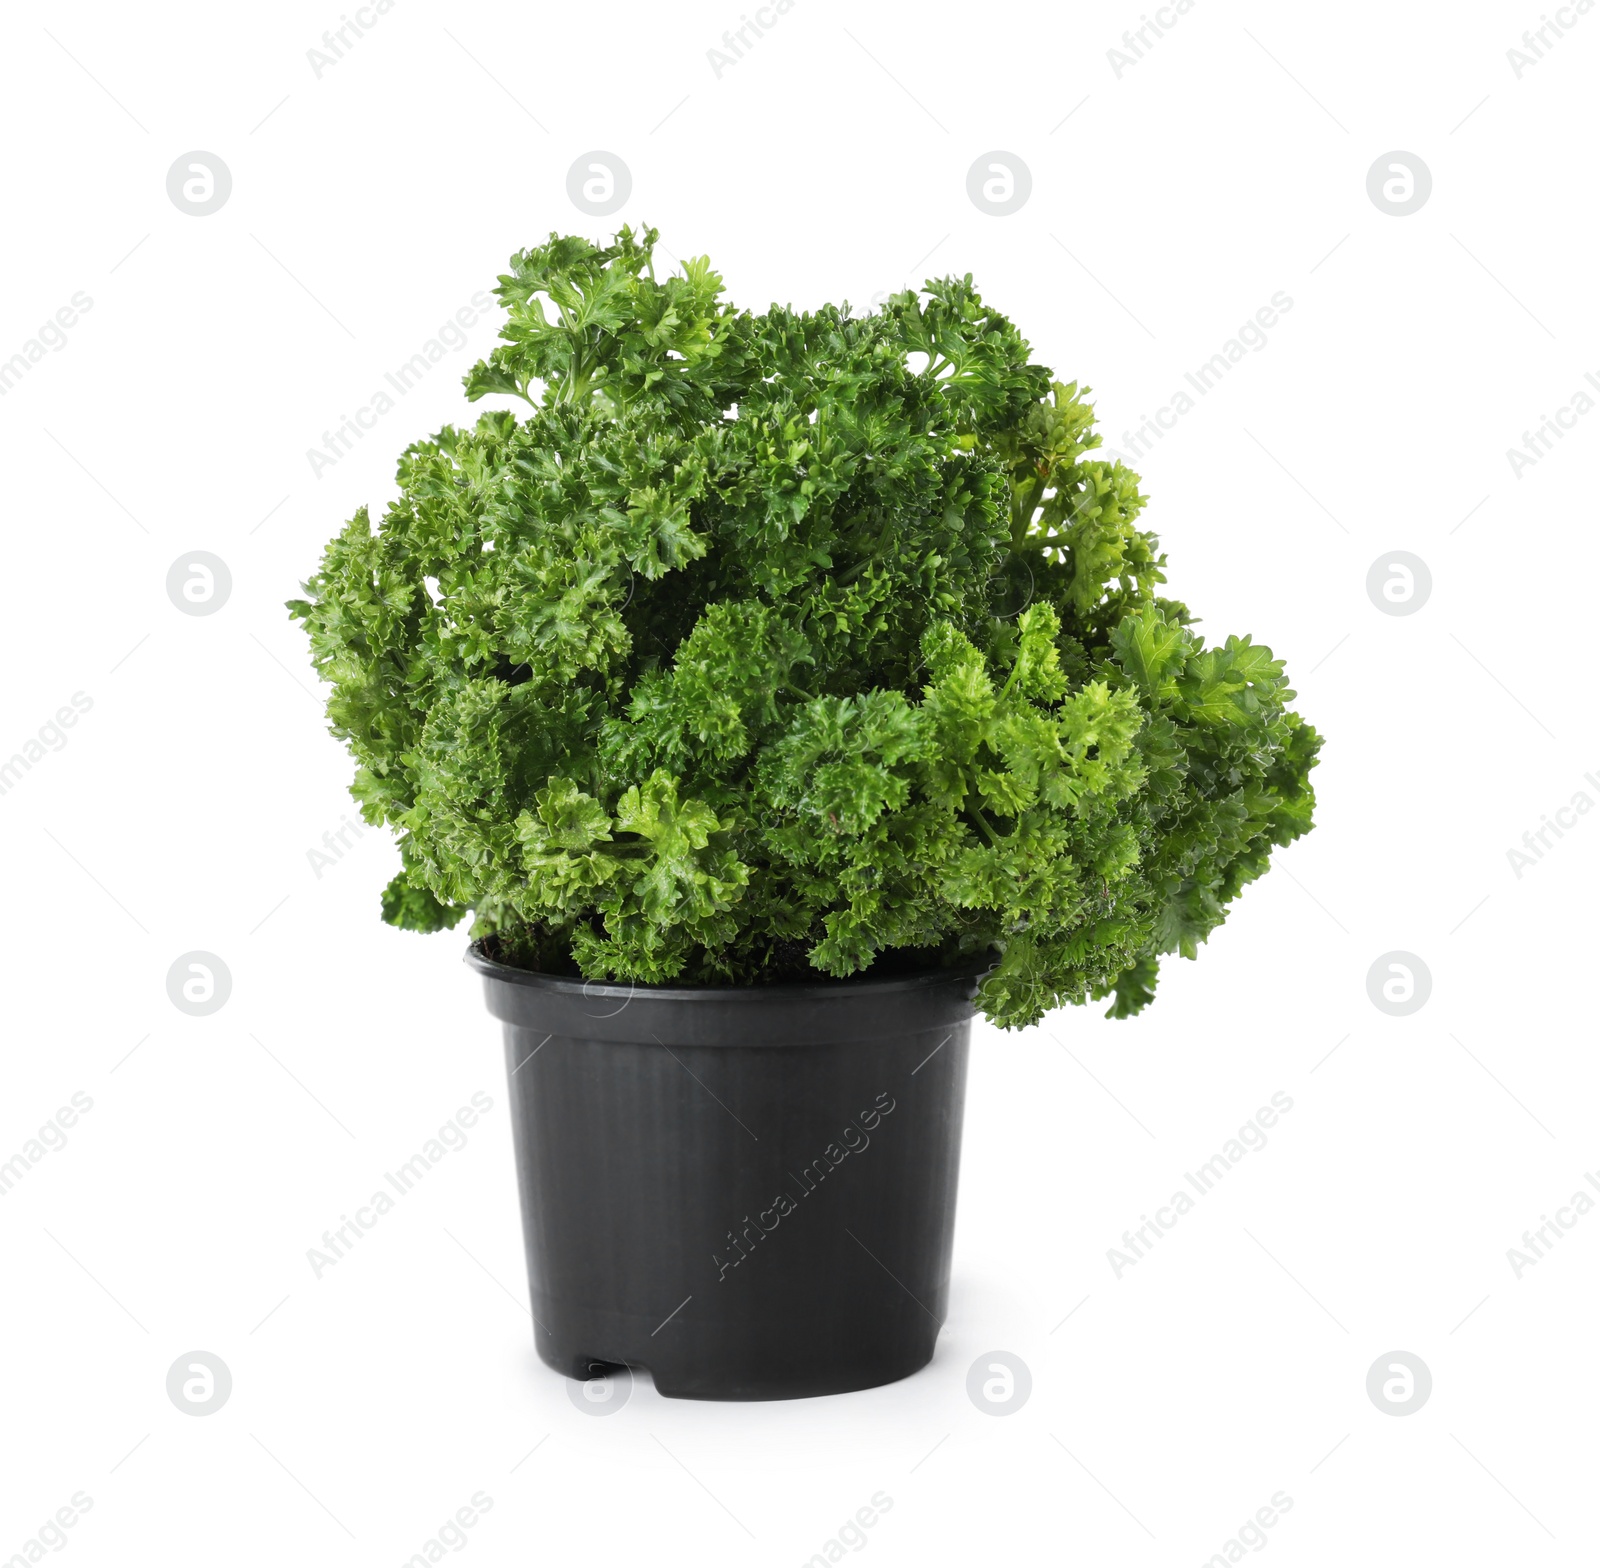 Photo of Seedling of aromatic fresh curly parsley in pot on white background